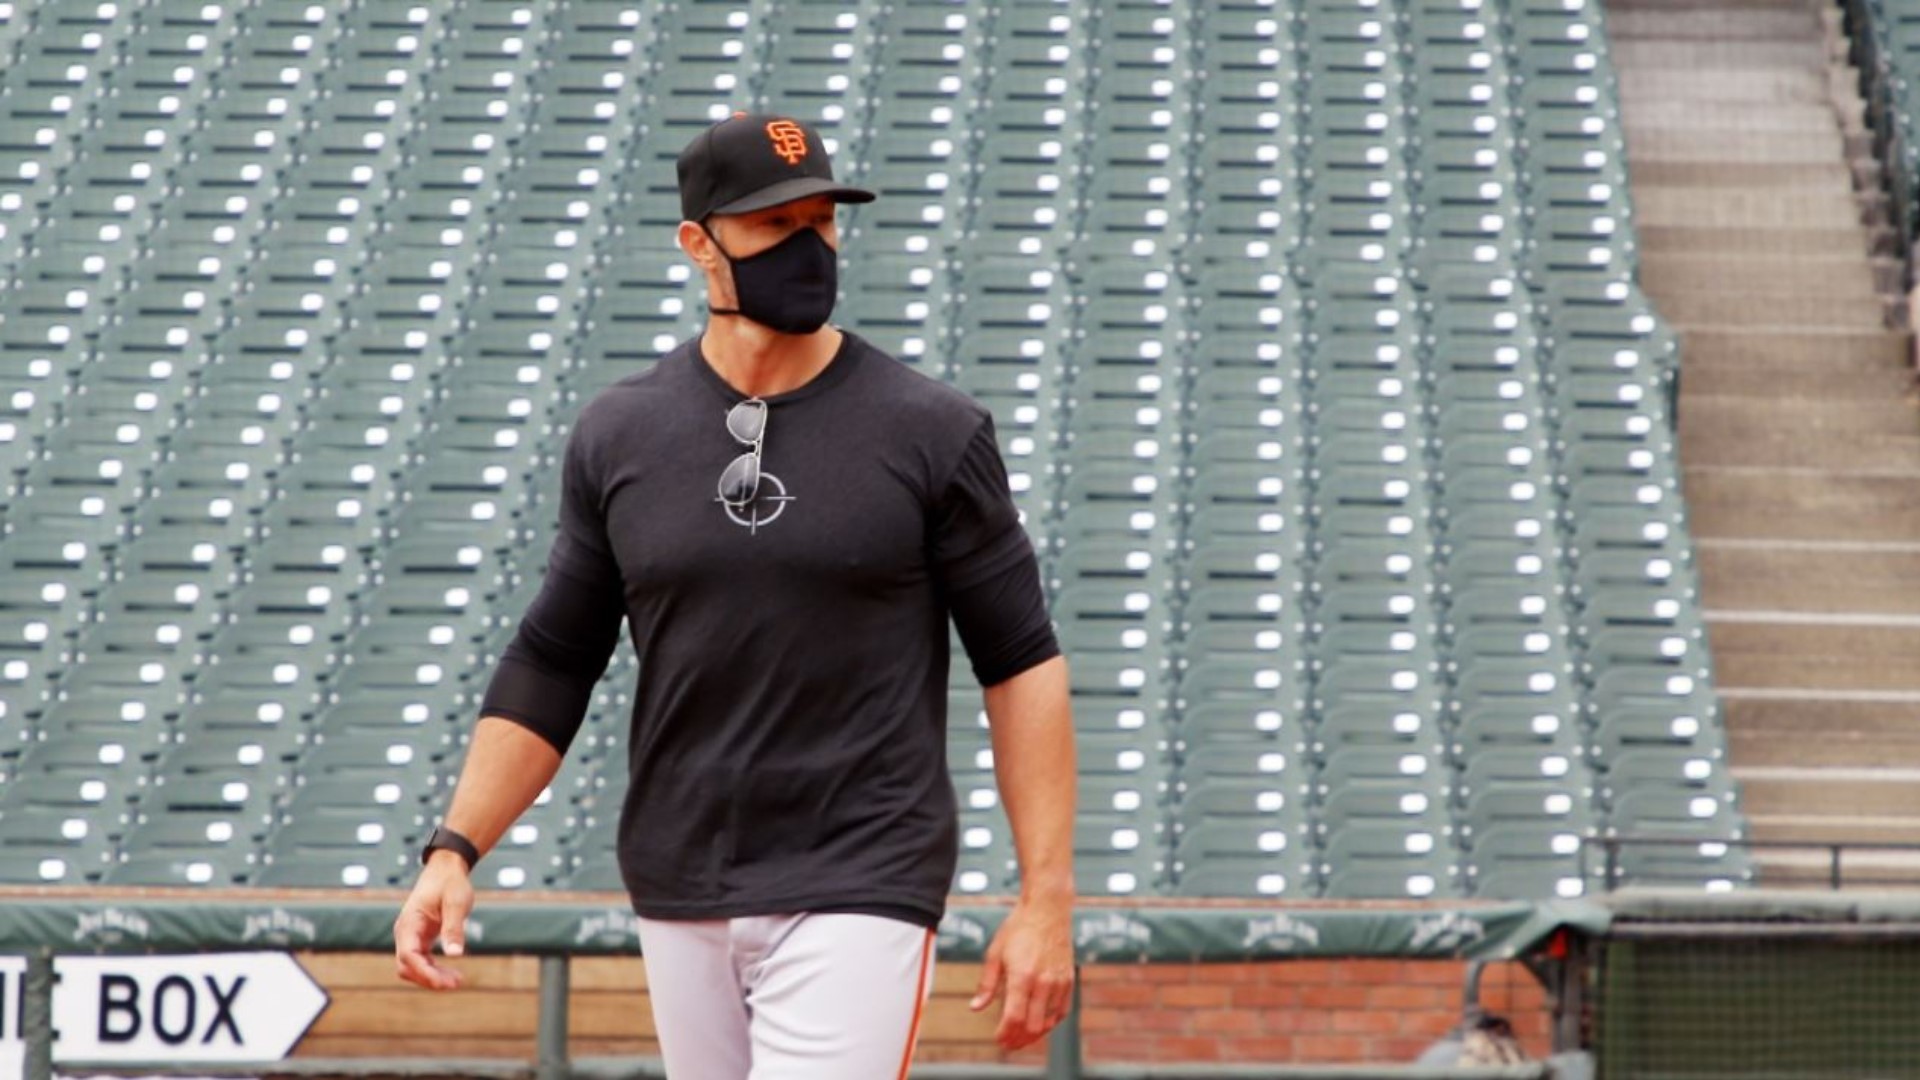 The Giants returned to San Francisco to hold their first team training session at Oracle Park as they prepare to begin a 60-game Major League Baseball season.